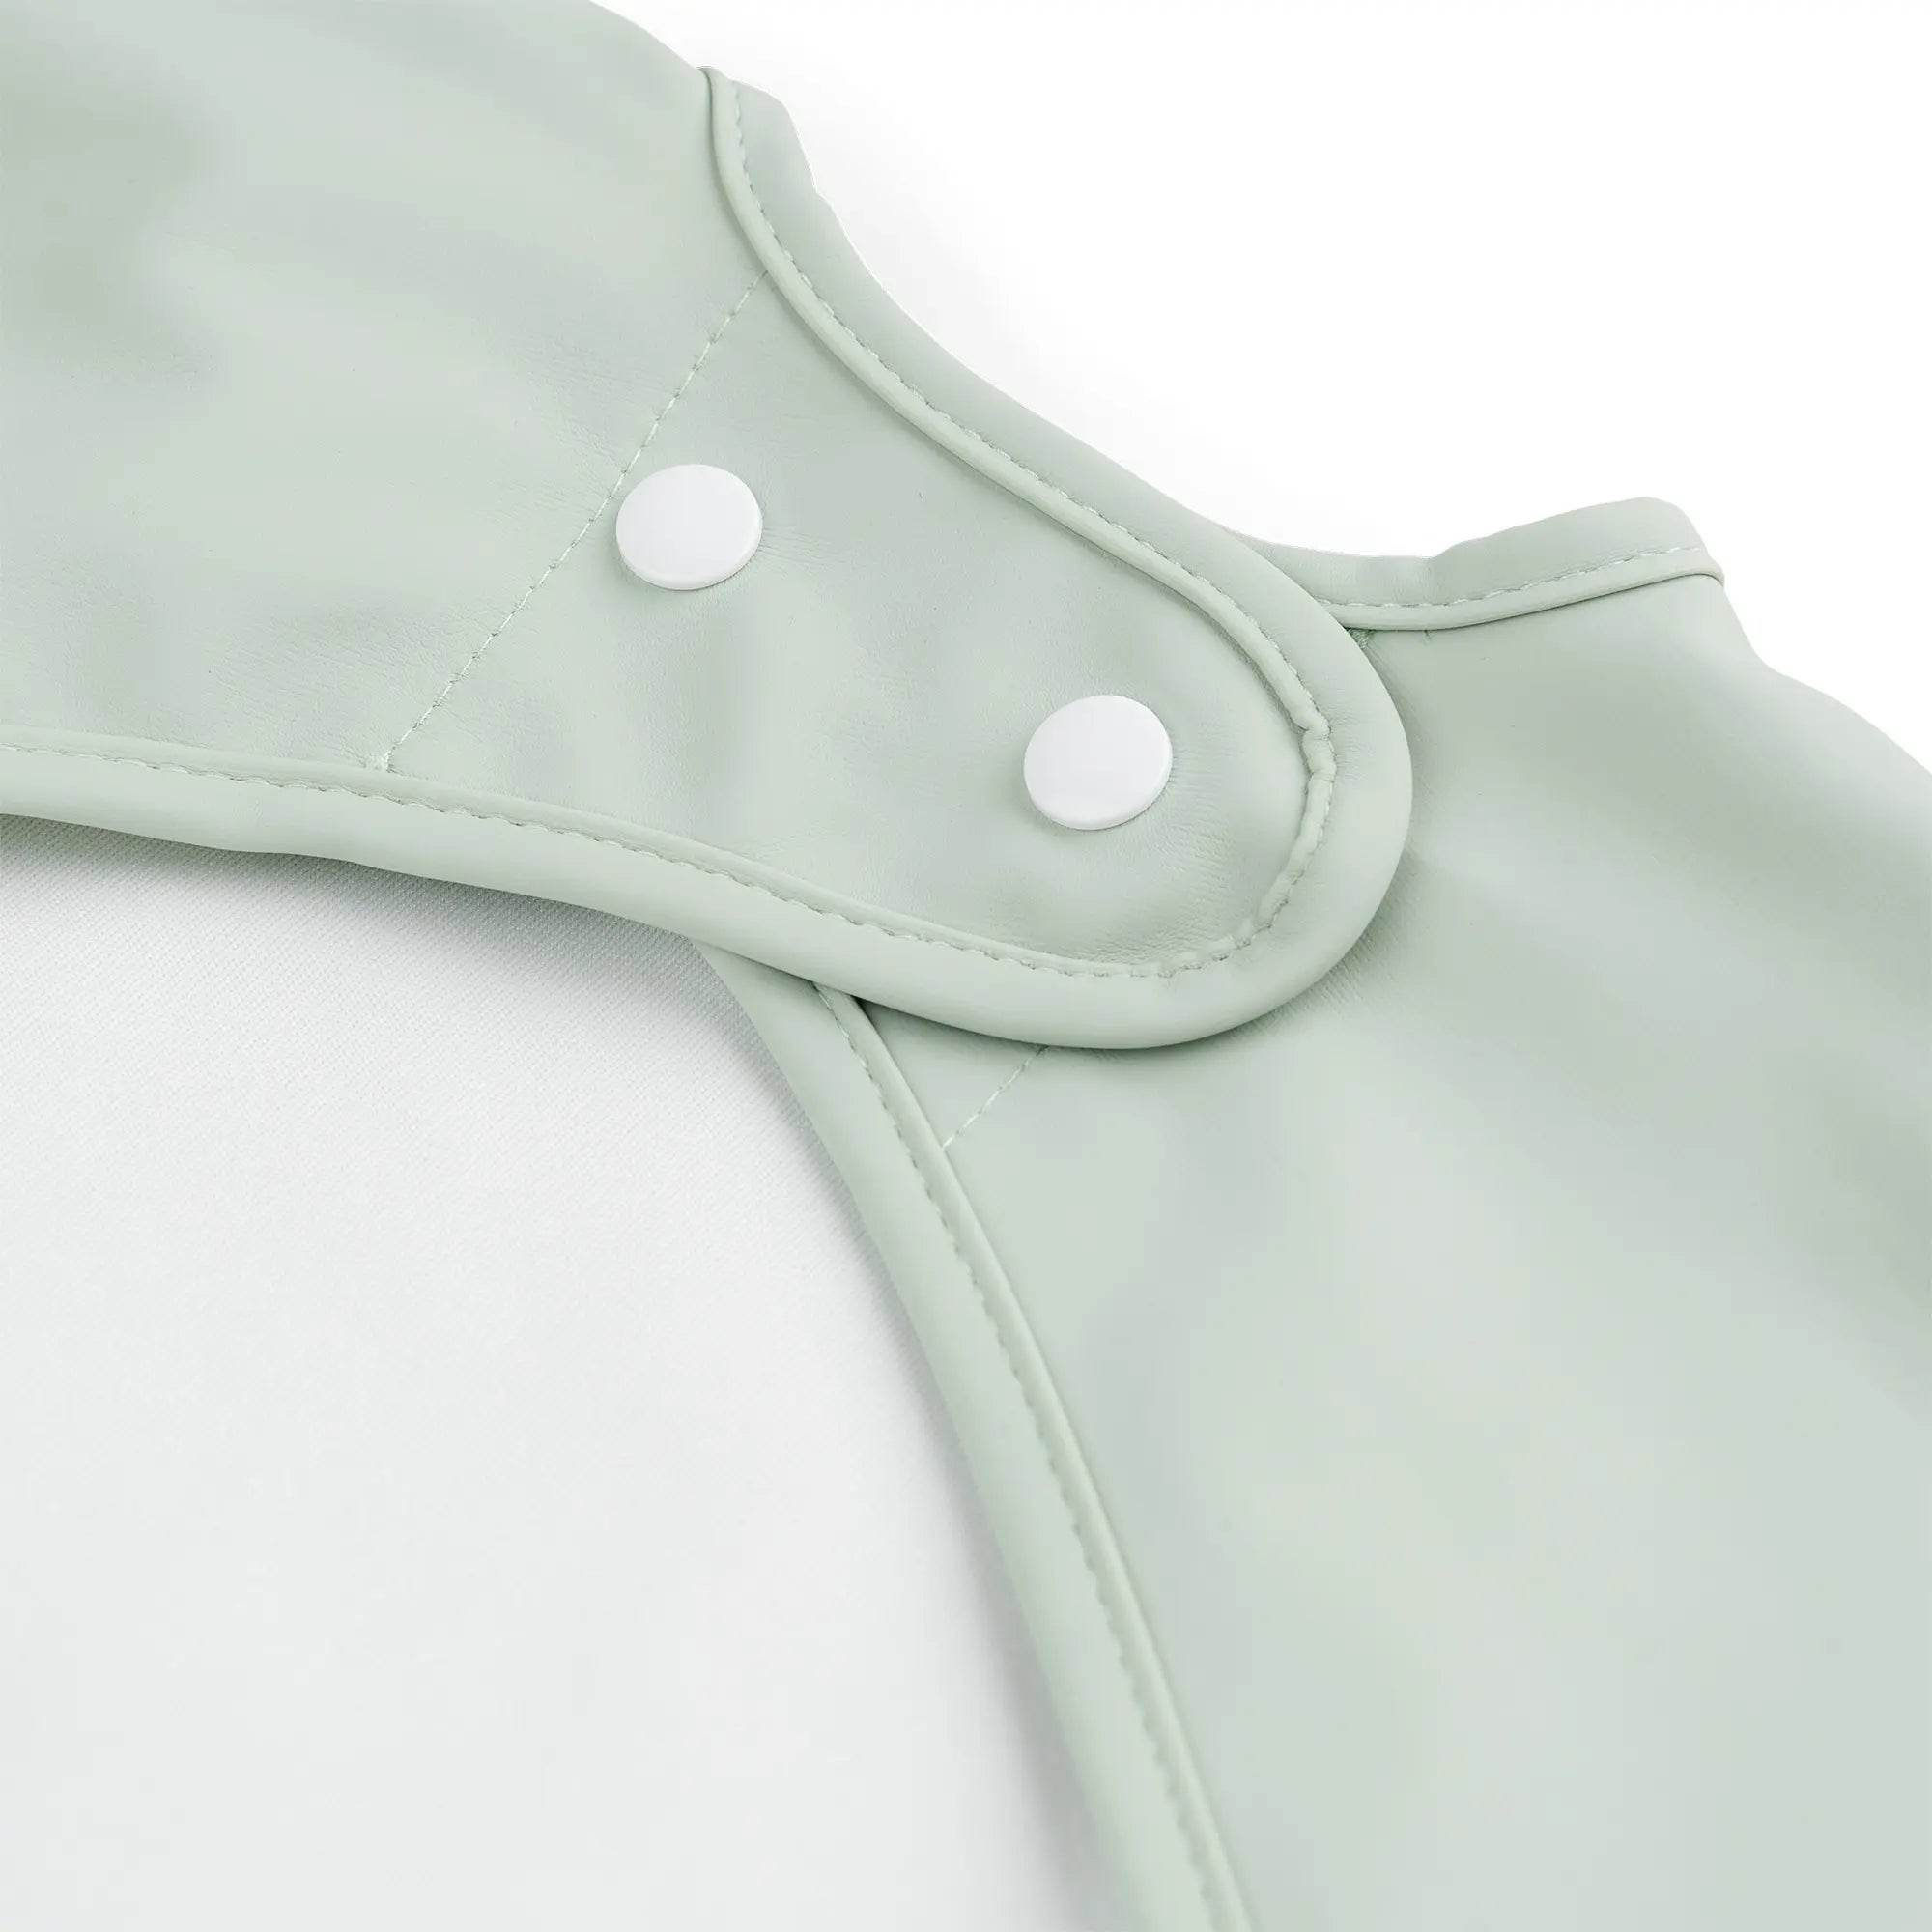 Done by Deer Bib Sleeved Pocket – Croco Green - Tiny Tots Baby Store 